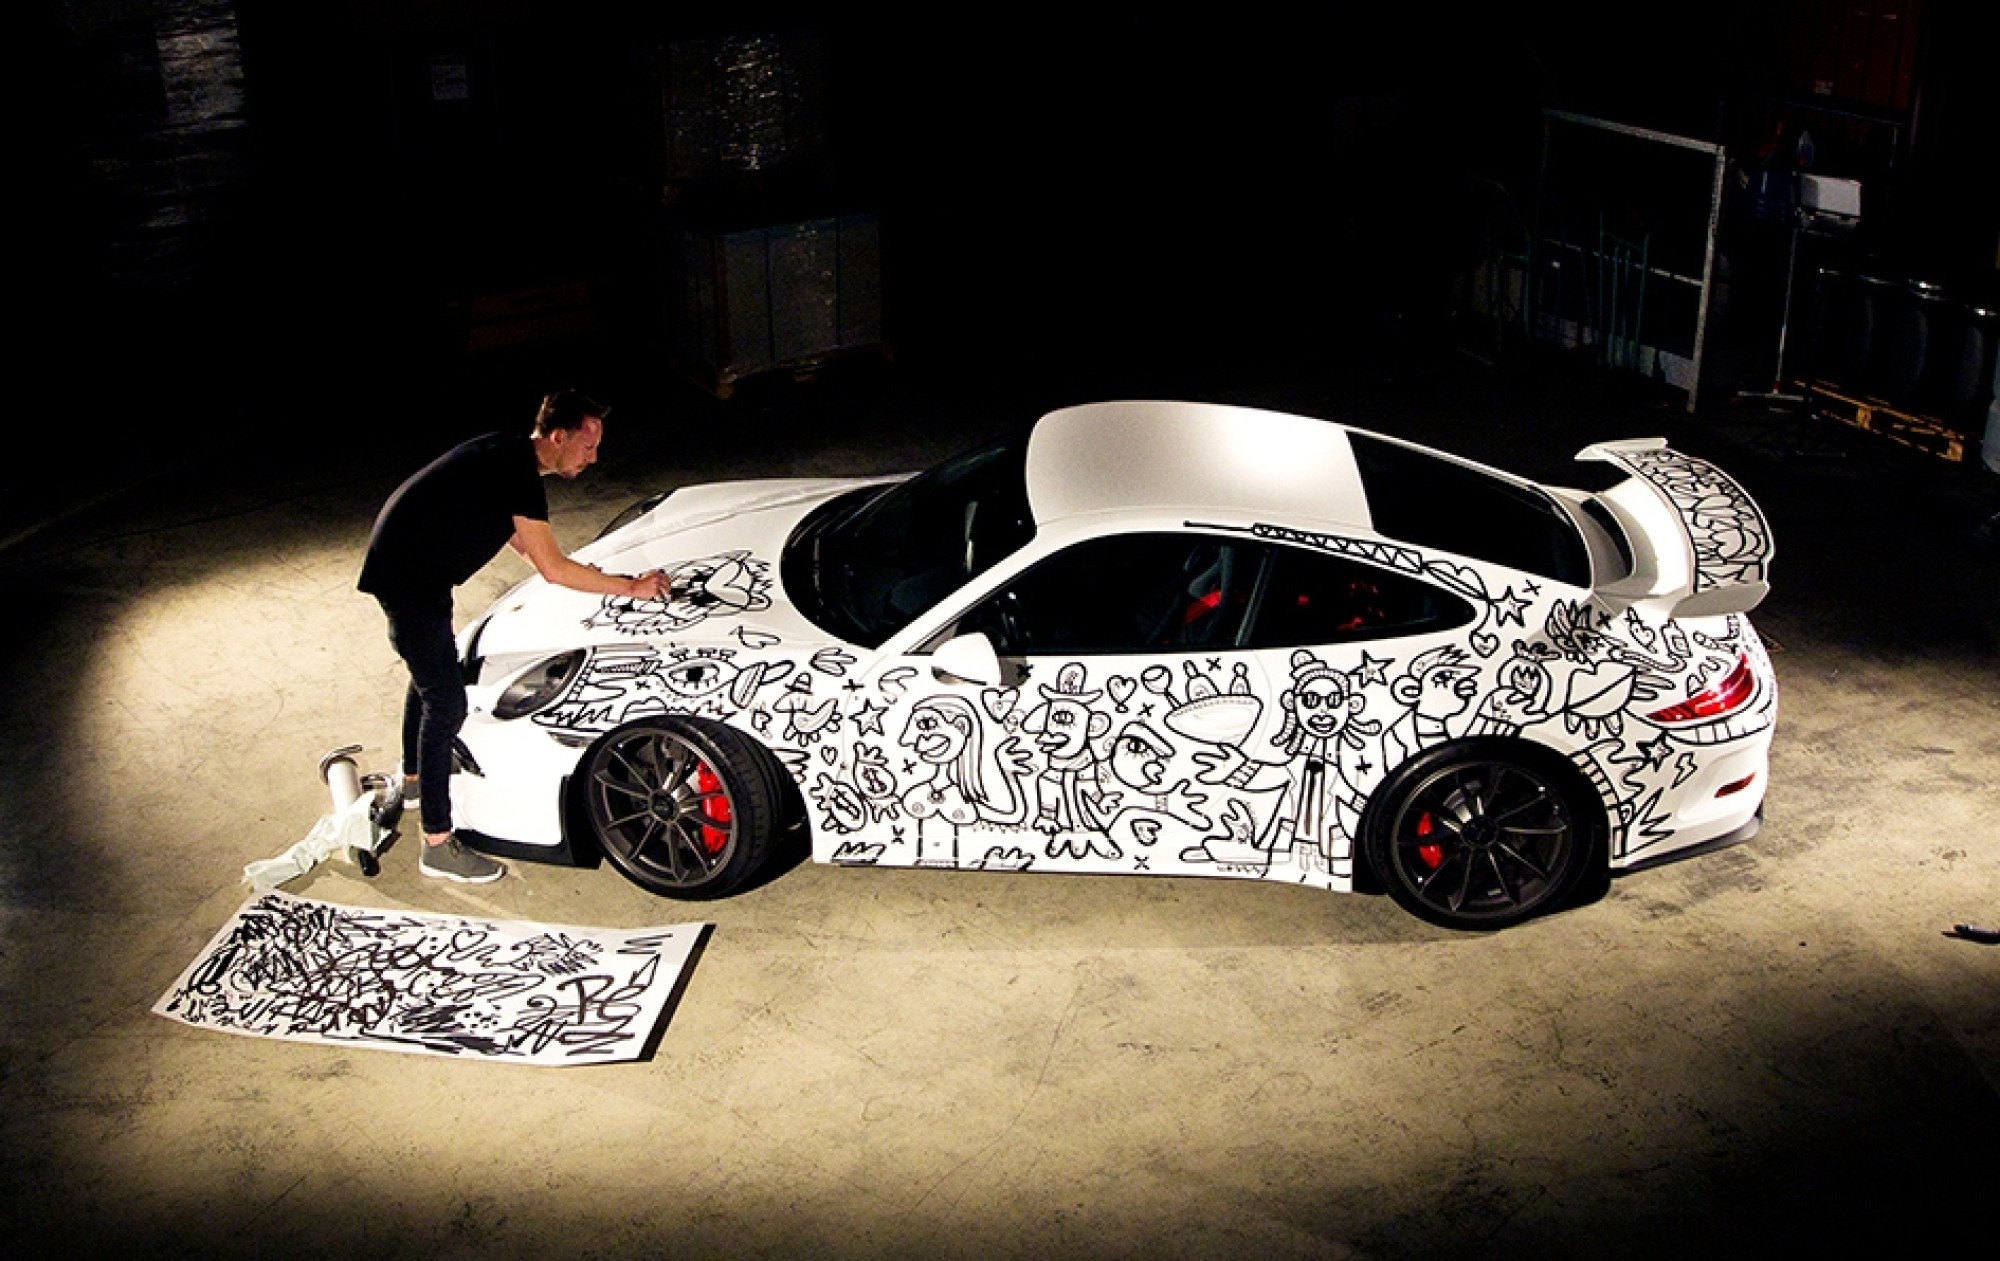 Artist Pablo Lücker never provides sketches for collaborations. He just starts drawing, letting his emotions determine whatever flows out spontaneously. Here, he is freely painting a Porsche, another collaboration with a luxury brand in his portfolio. title=